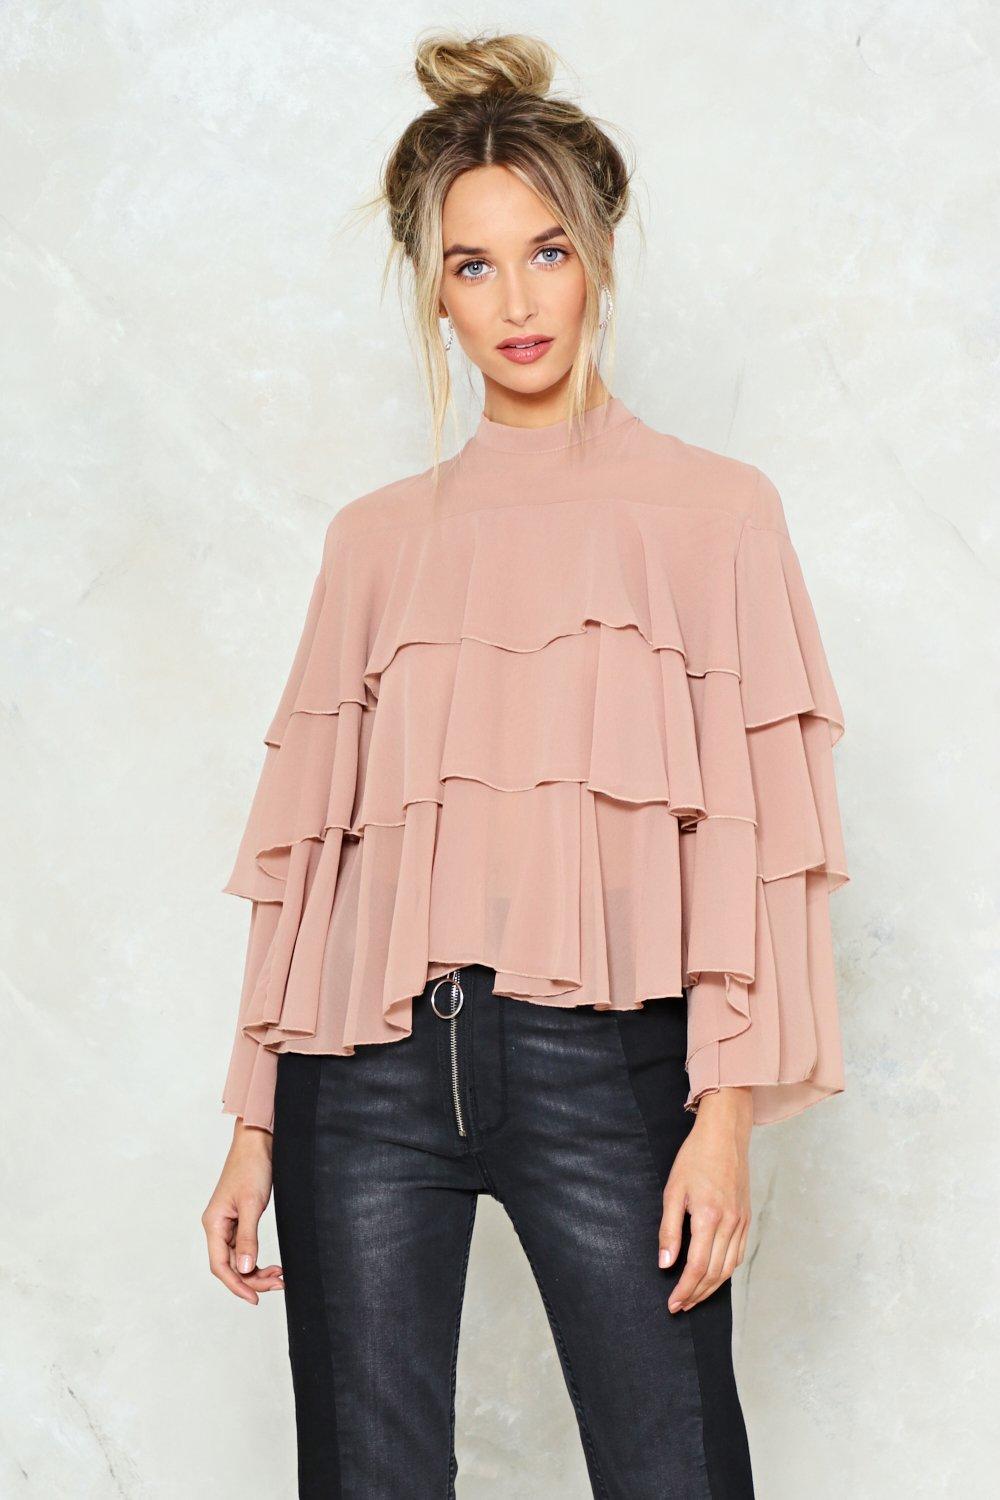 Dry My Tiers Ruffle Blouse | Nasty Gal